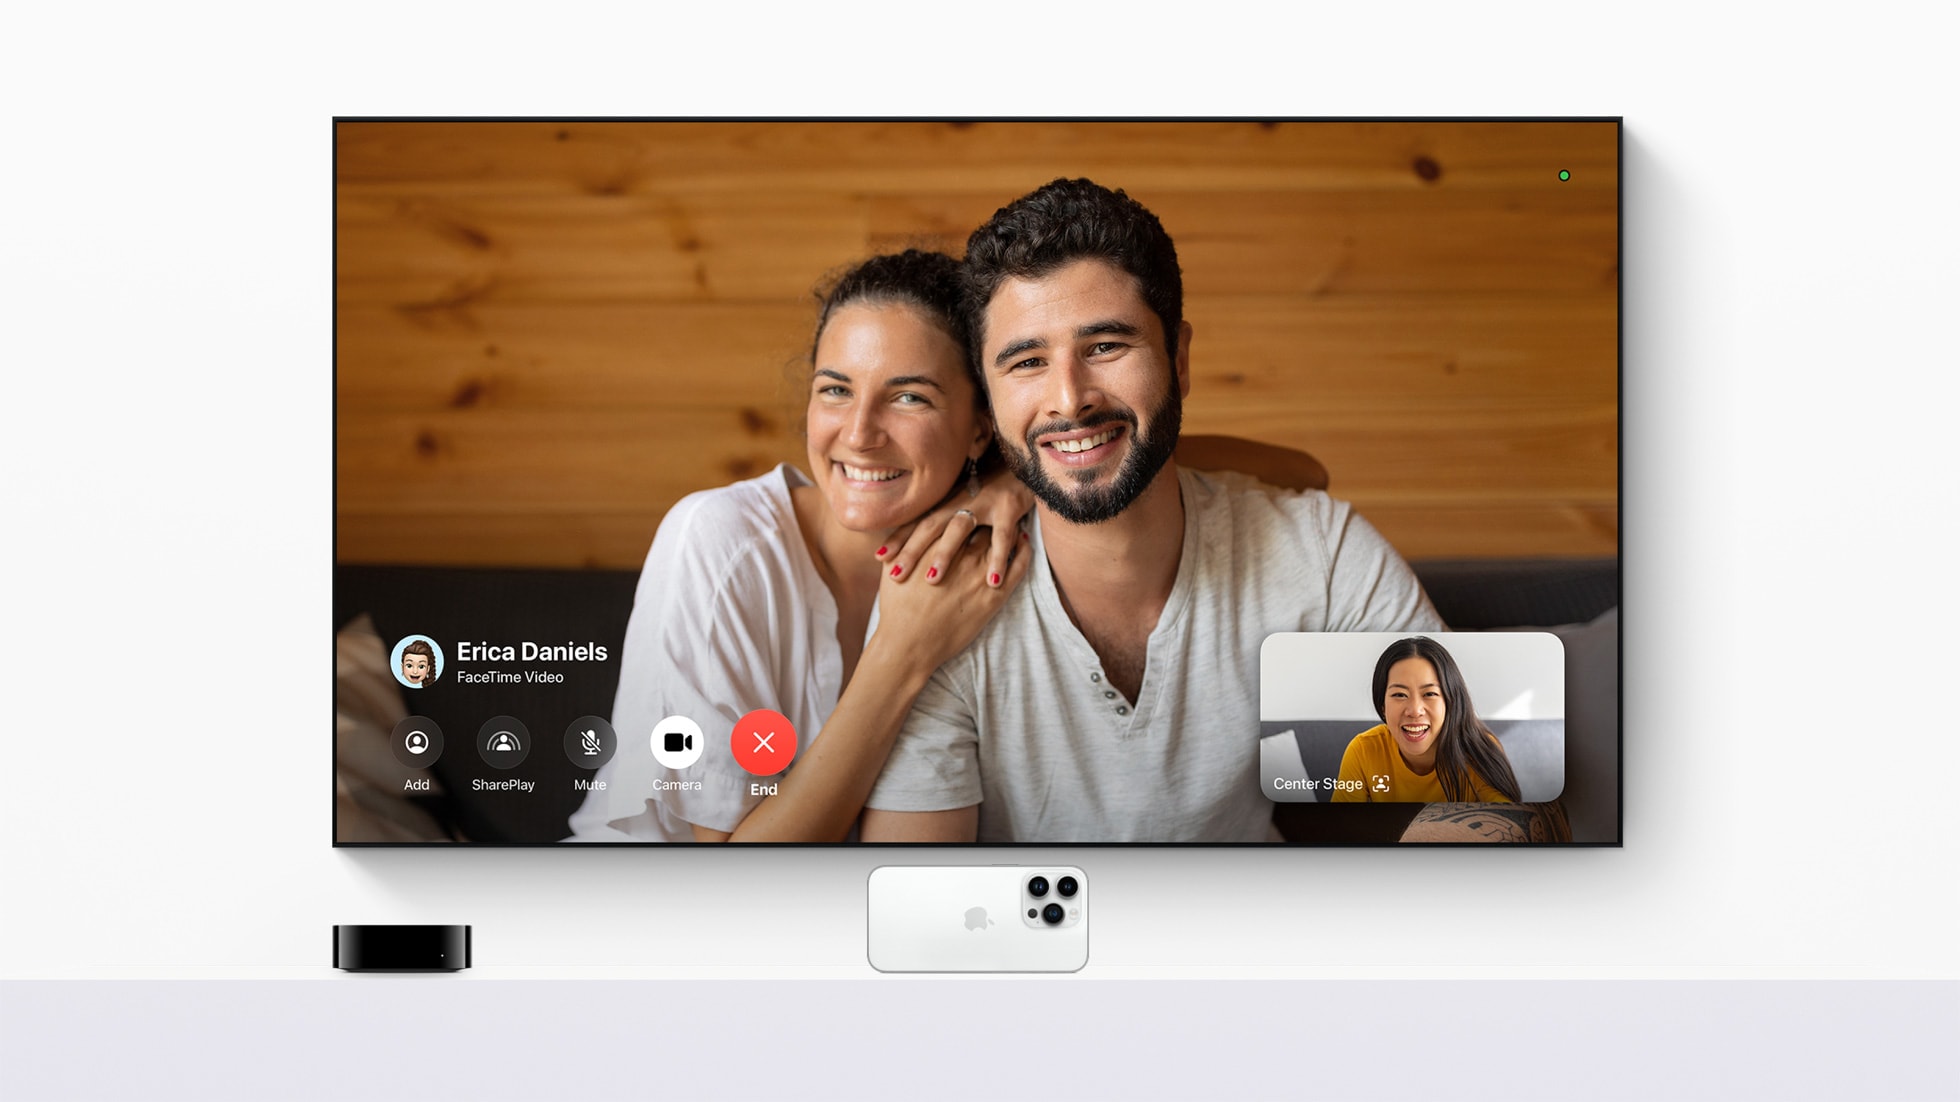 With the tvOS 17 update, FaceTime comes to Apple TV 4K for the first time.